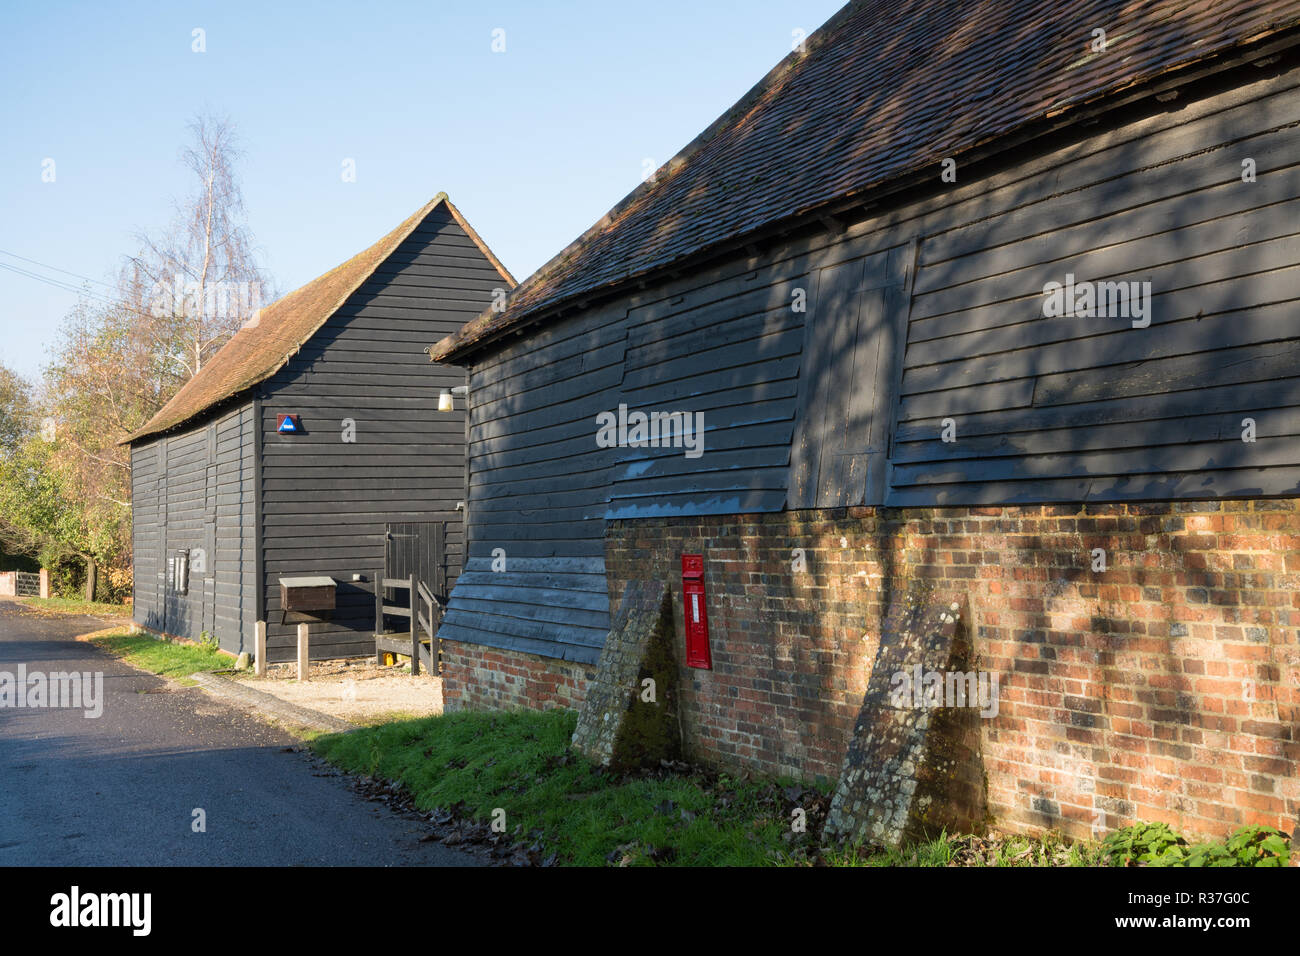 The Great Barn, built in 1388, in the small rural village of Wanborough, Surrey, UK. Historic building, agricultural heritage. Stock Photo